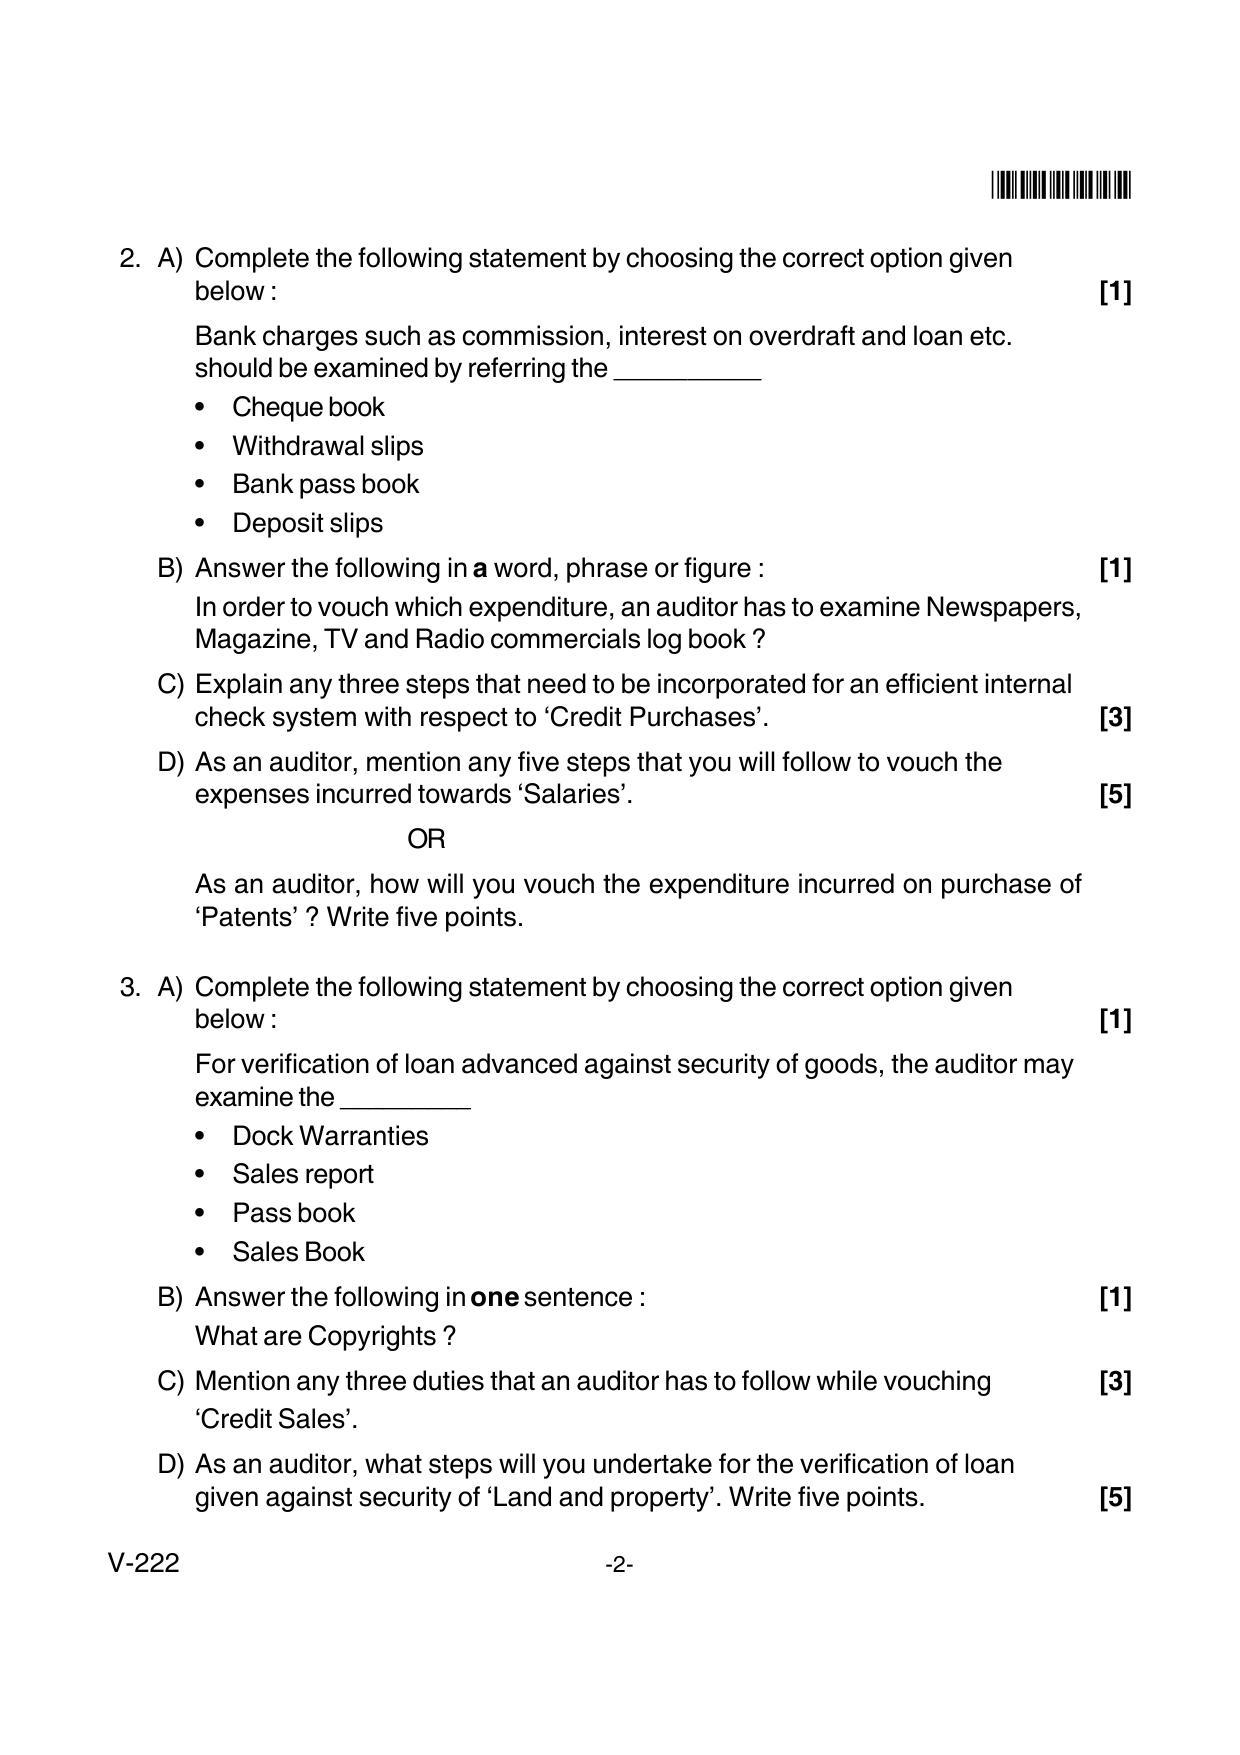 Goa Board Class 12 Principles & Practice of Auditing  Voc 222 New Pattern (March 2018) Question Paper - Page 2